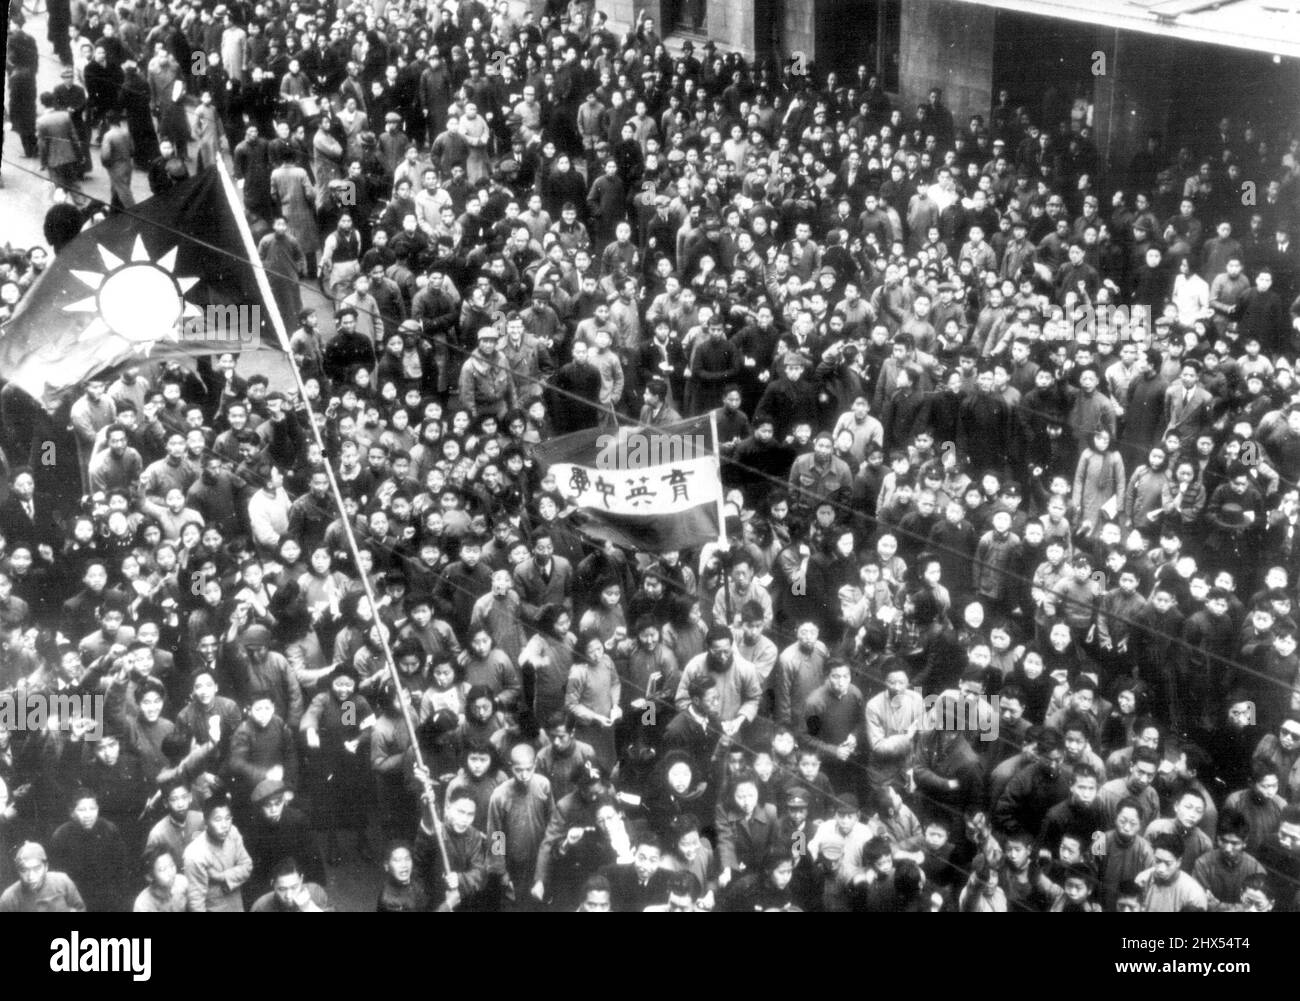 Chinese Students Protest Against Soviet Troops In Manchuria - Waving a Chinese flag and carrying a banker, Chinese students gather in front of the Soviet consulate in Shanghai to agitate for removal of Soviet Troops from Manchuria. Some 2,500 persons took a part in the Demonstration, staged at the same time the consulate was celebrating the 28th anniversary of founding of Red Army. March 6, 1946. (Photo by AP Wirephoto). Stock Photo